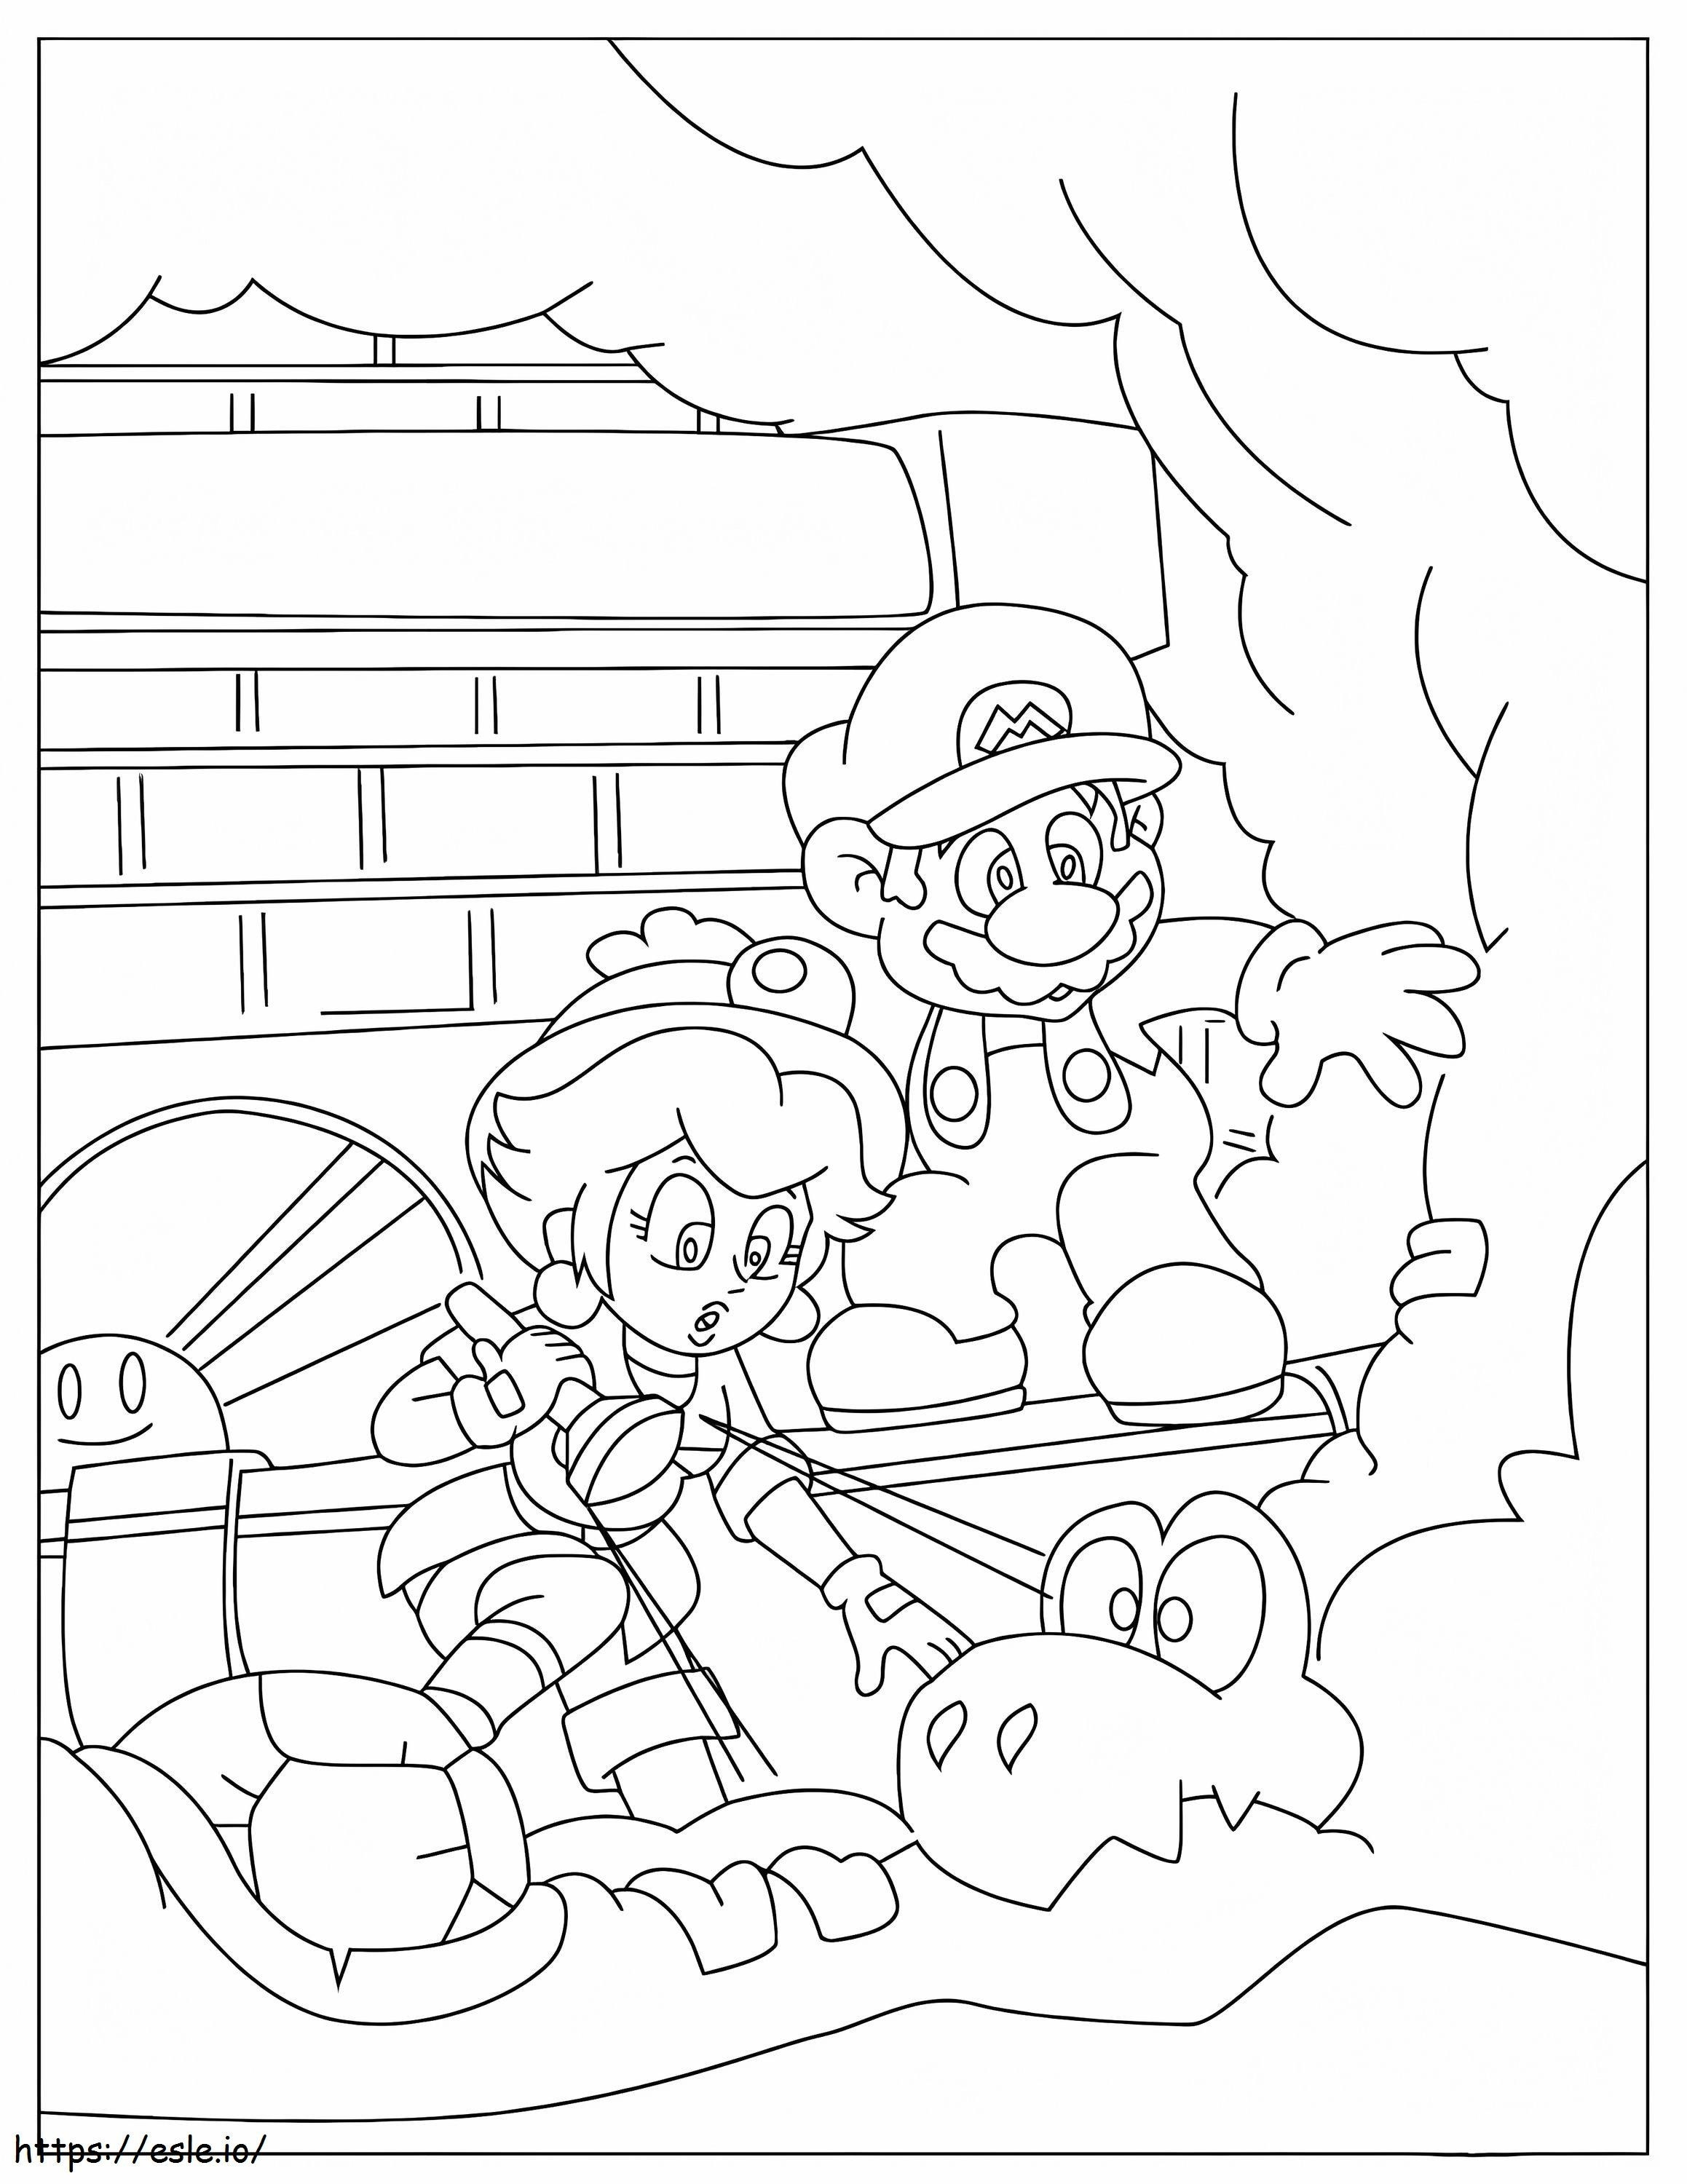 Funny Princess Peach And Friends coloring page